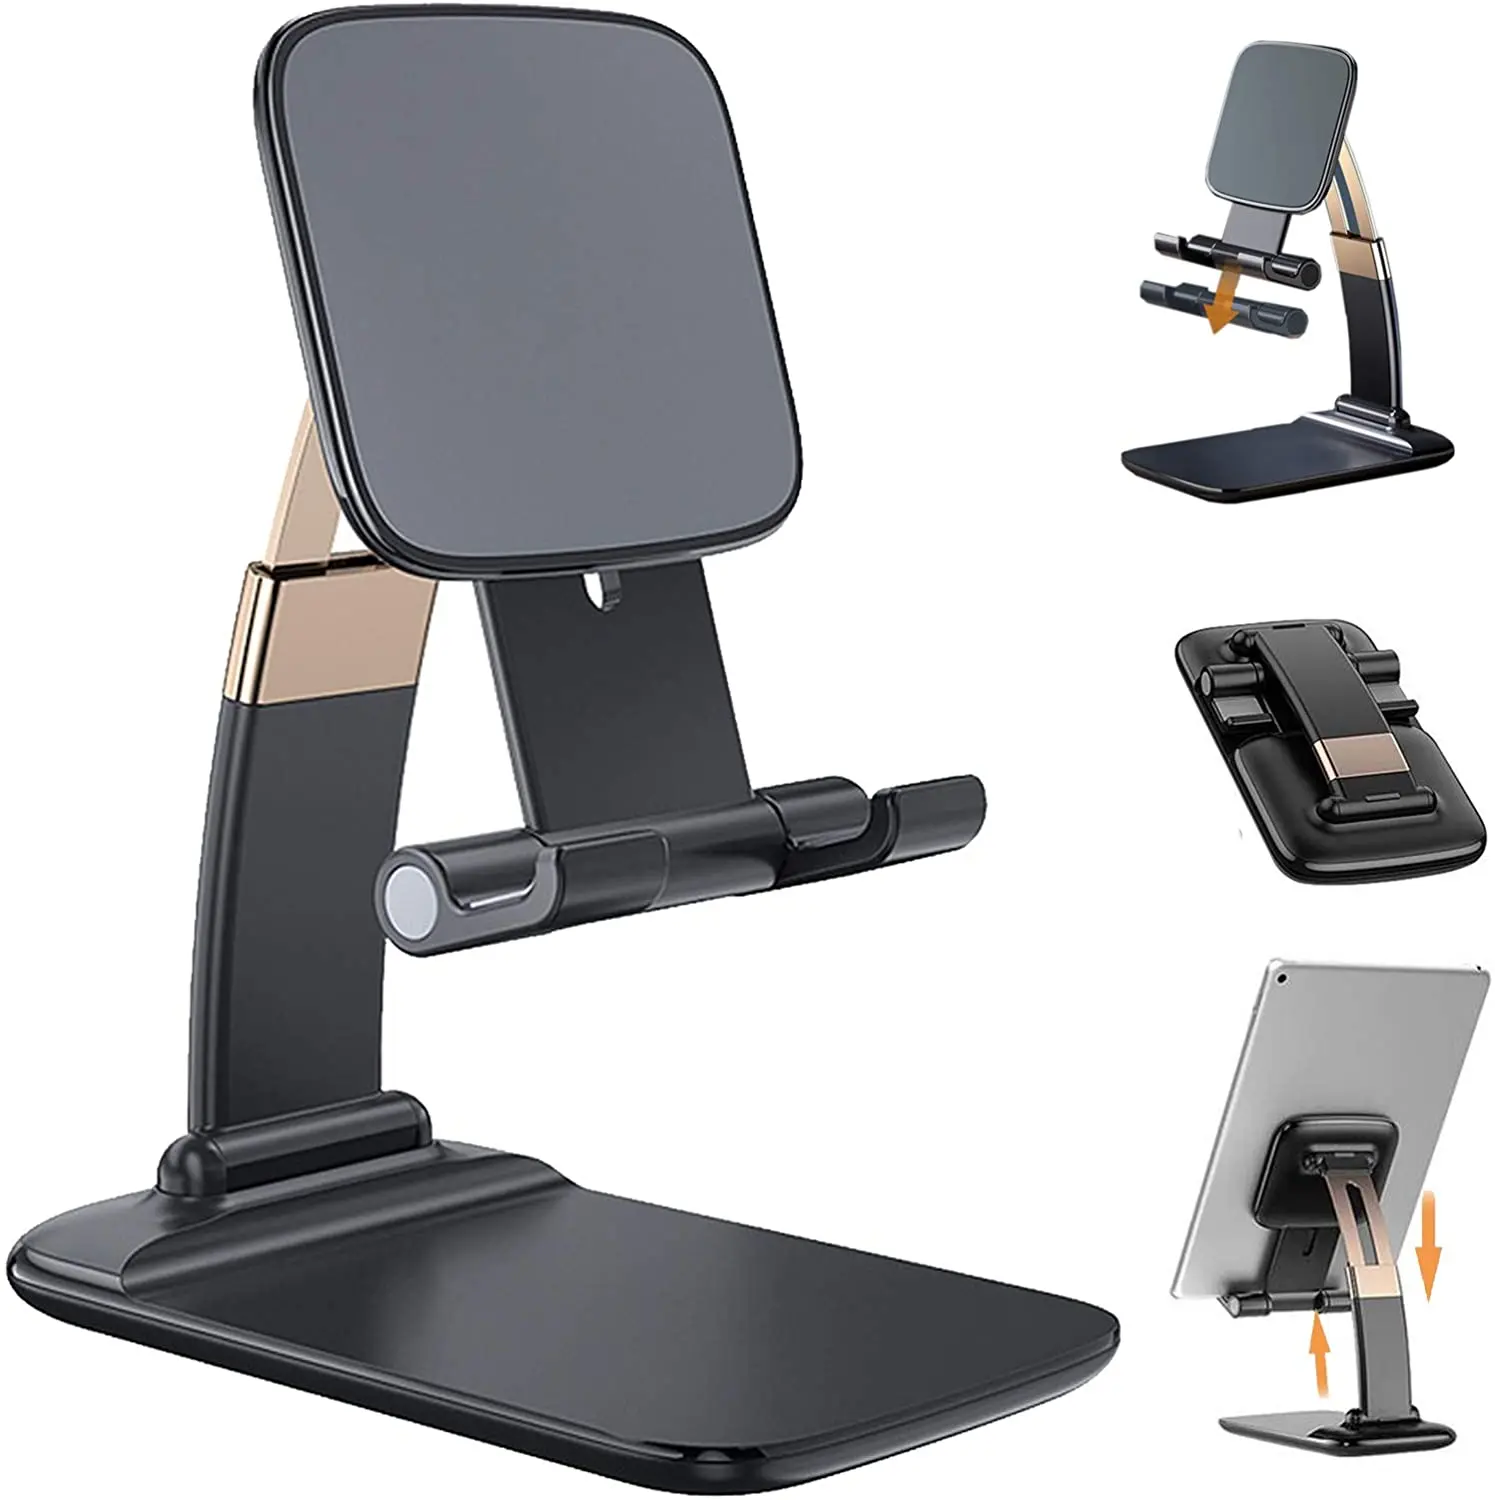 

Licheers Cell Phone Stand Angle Height Adjustable Desktop Phone Holder Thick Case Friendly Phone Holder Stand for Desk